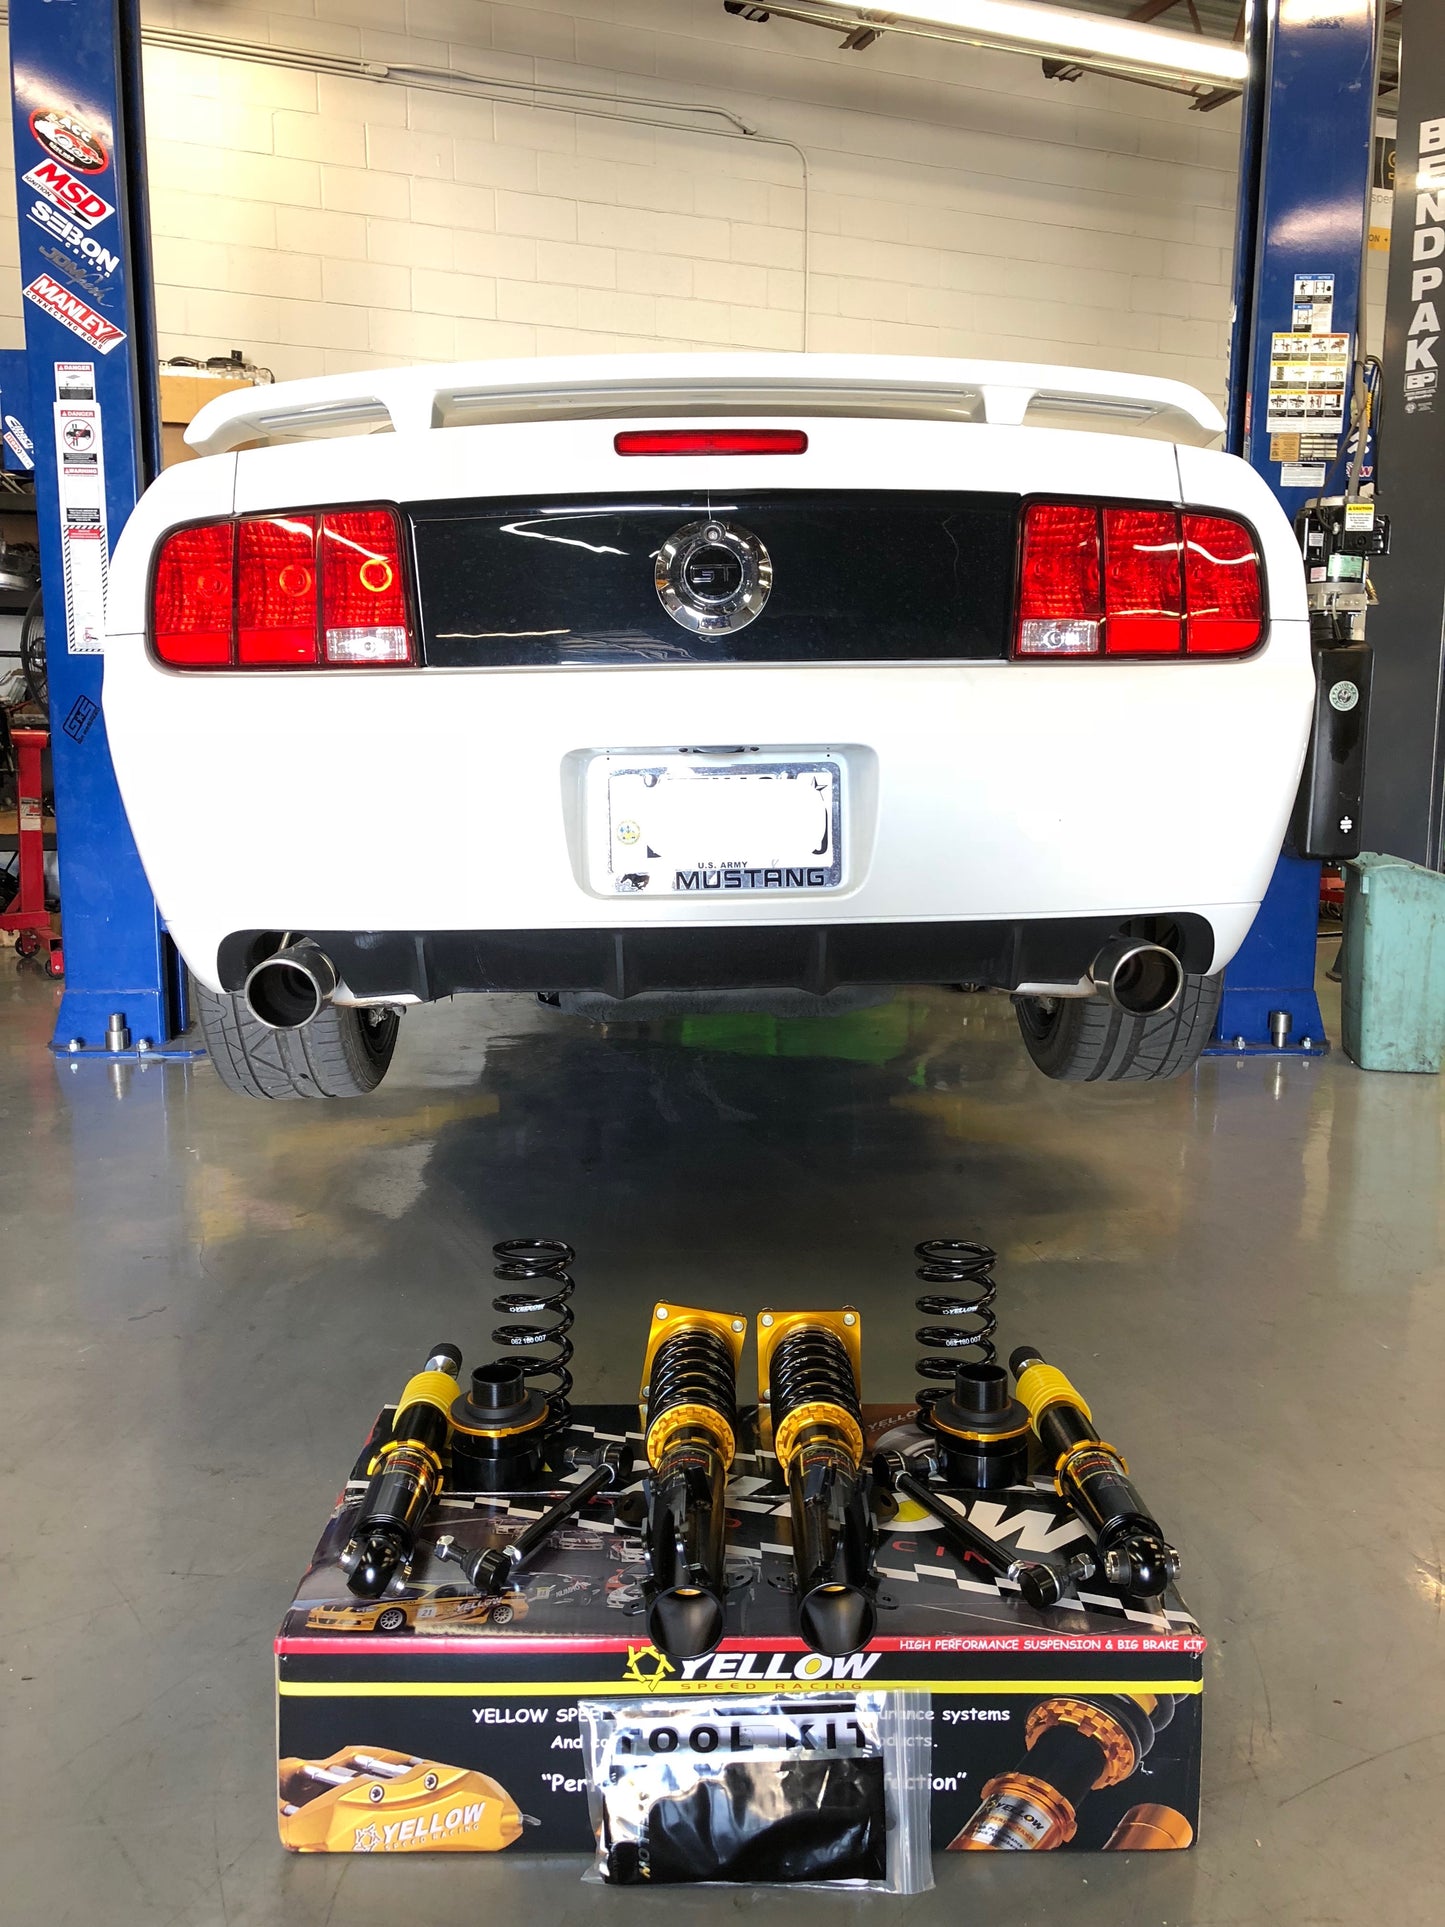 Dynamic Pro Sport Coilovers - Ford Mustang V6 2005-2014 (S197)